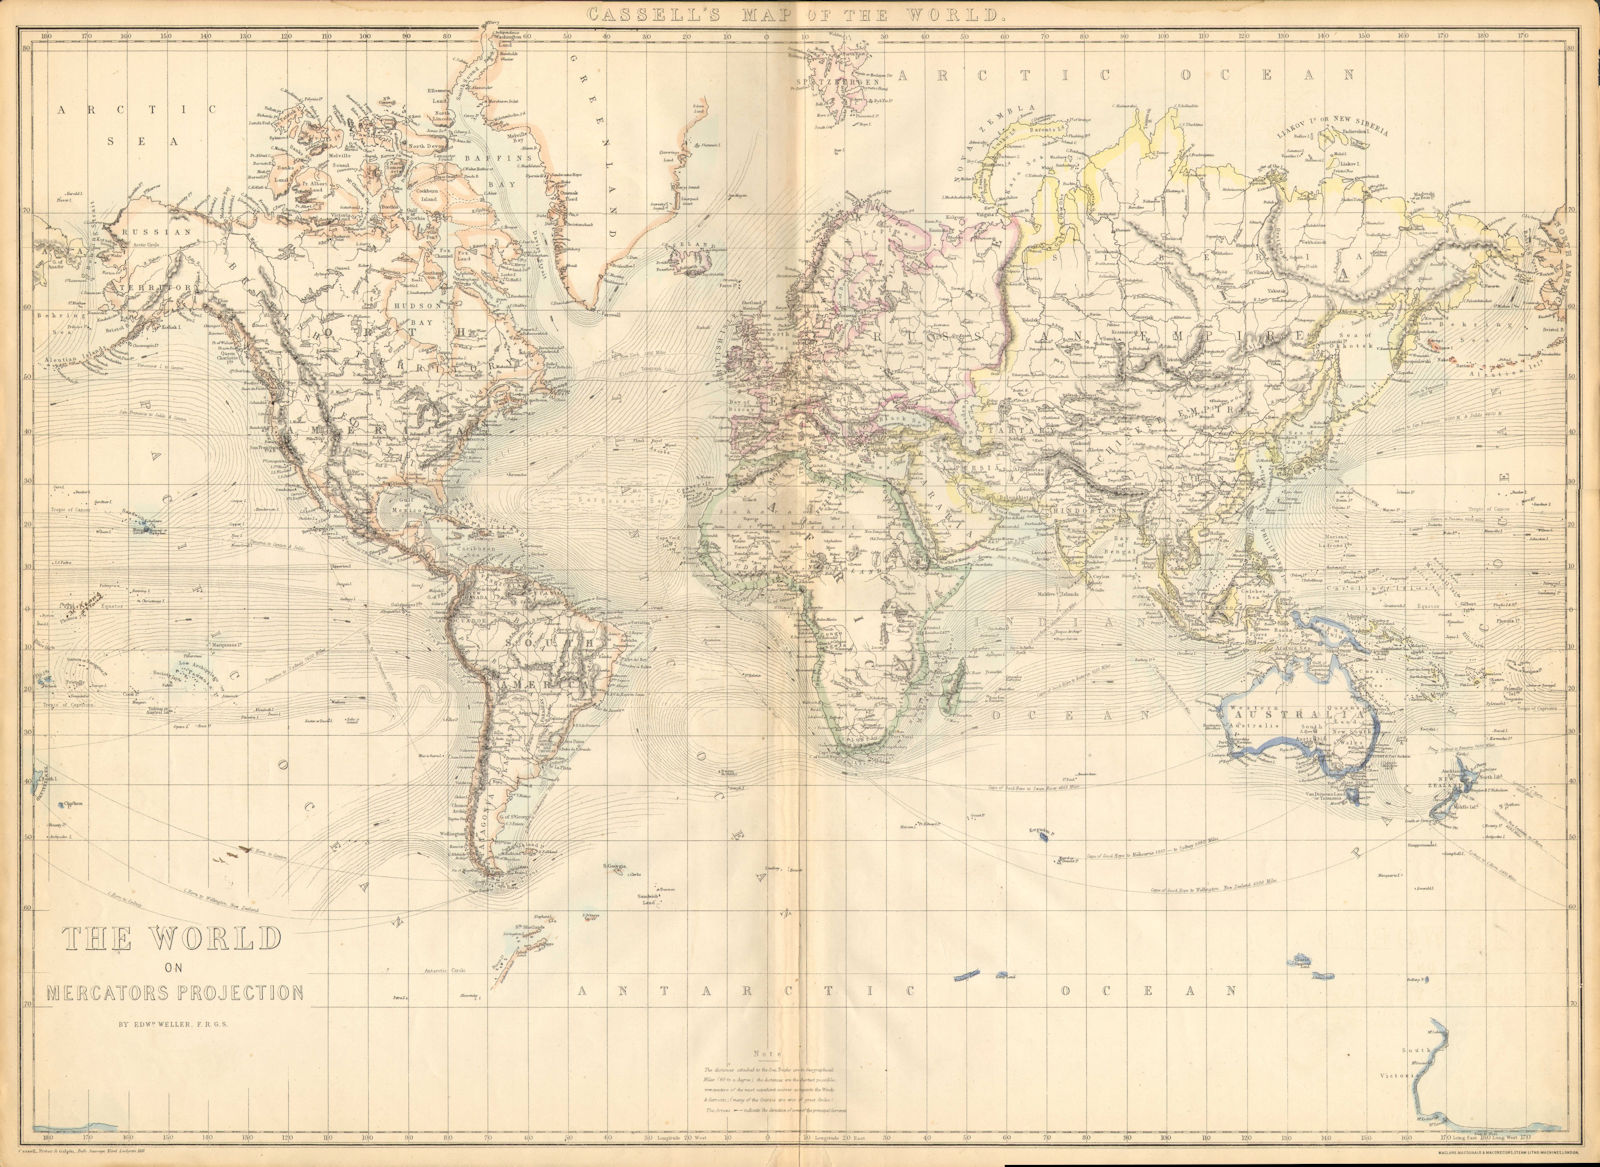 'The World on Mercators Projection'. Shows Mountains of Kong. WELLER 1863 map